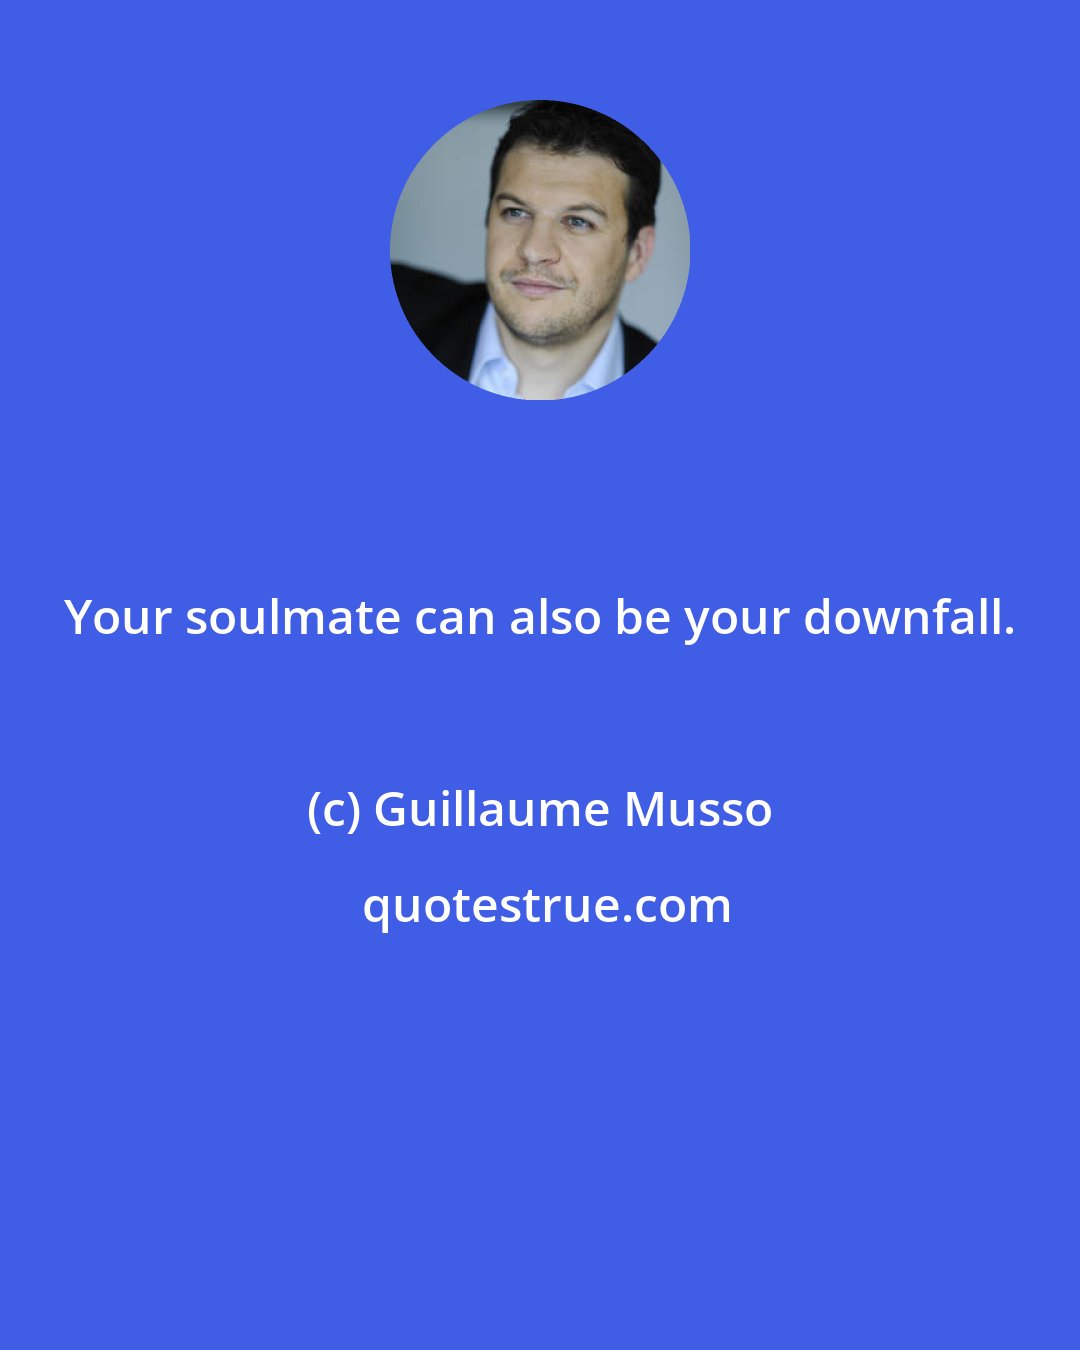 Guillaume Musso: Your soulmate can also be your downfall. 